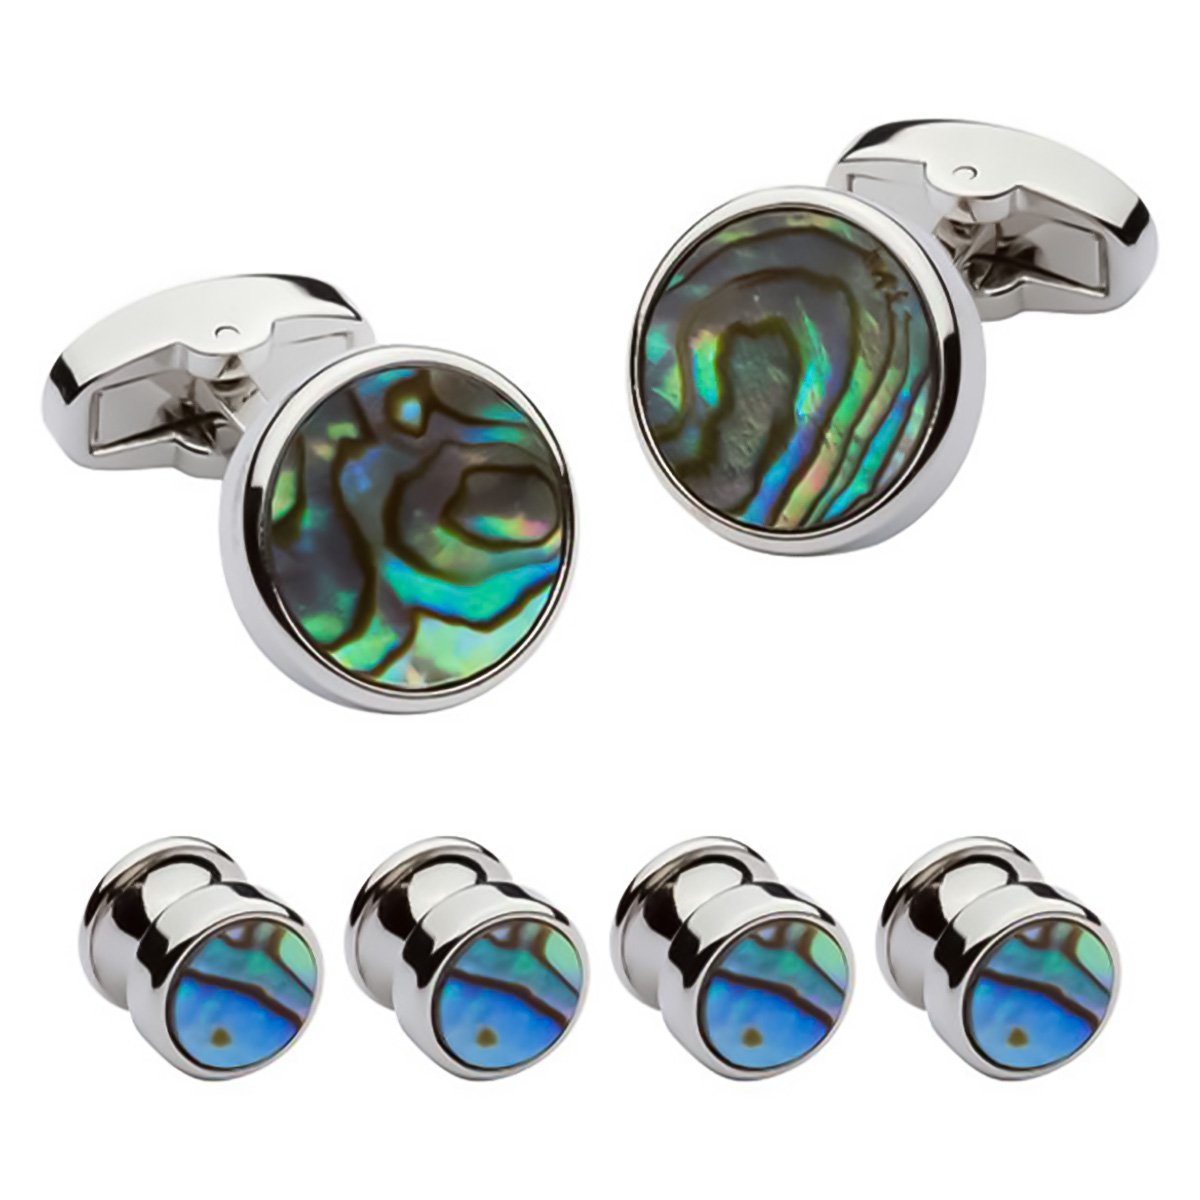 STERLING SILVER OVAL CUFFLINKS SET WITH ABLONE